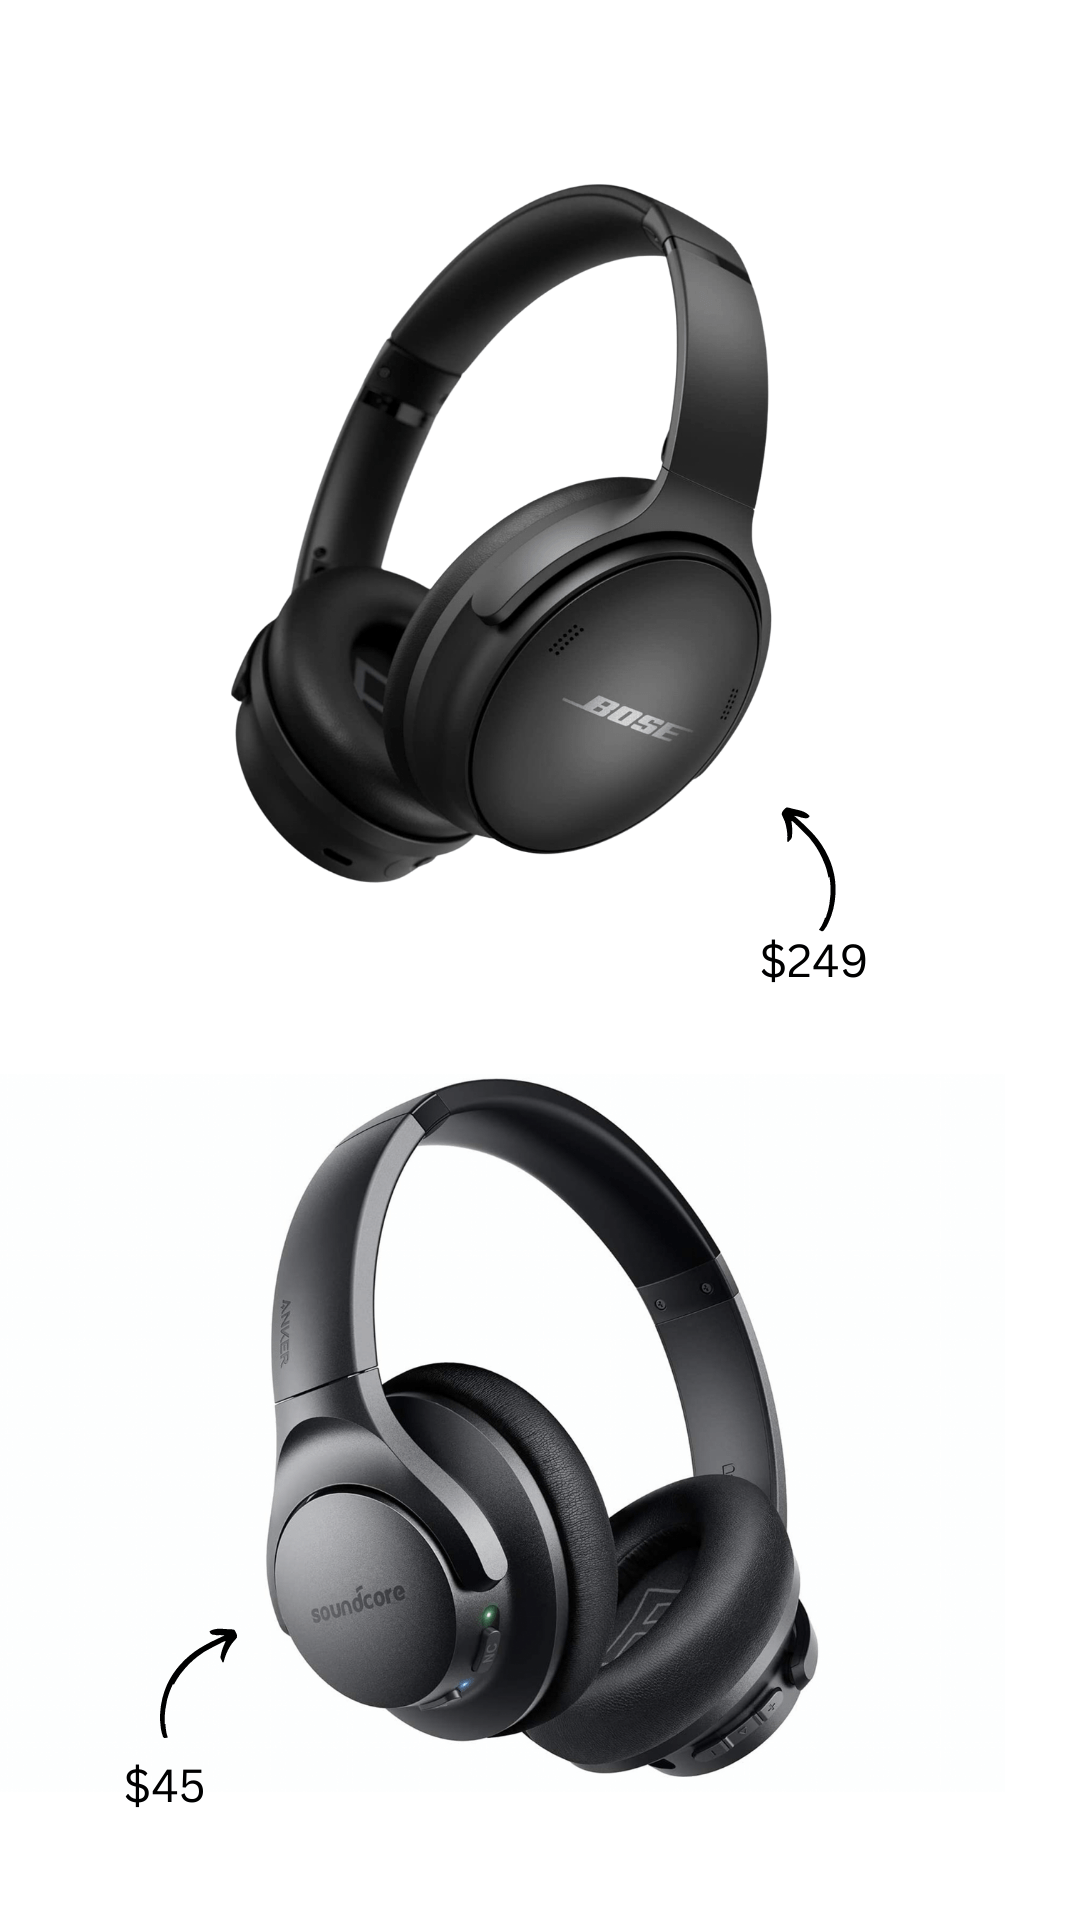 Two pairs of noise-cancelling headphones in black, with different pricing options, one for $249 and one for $45